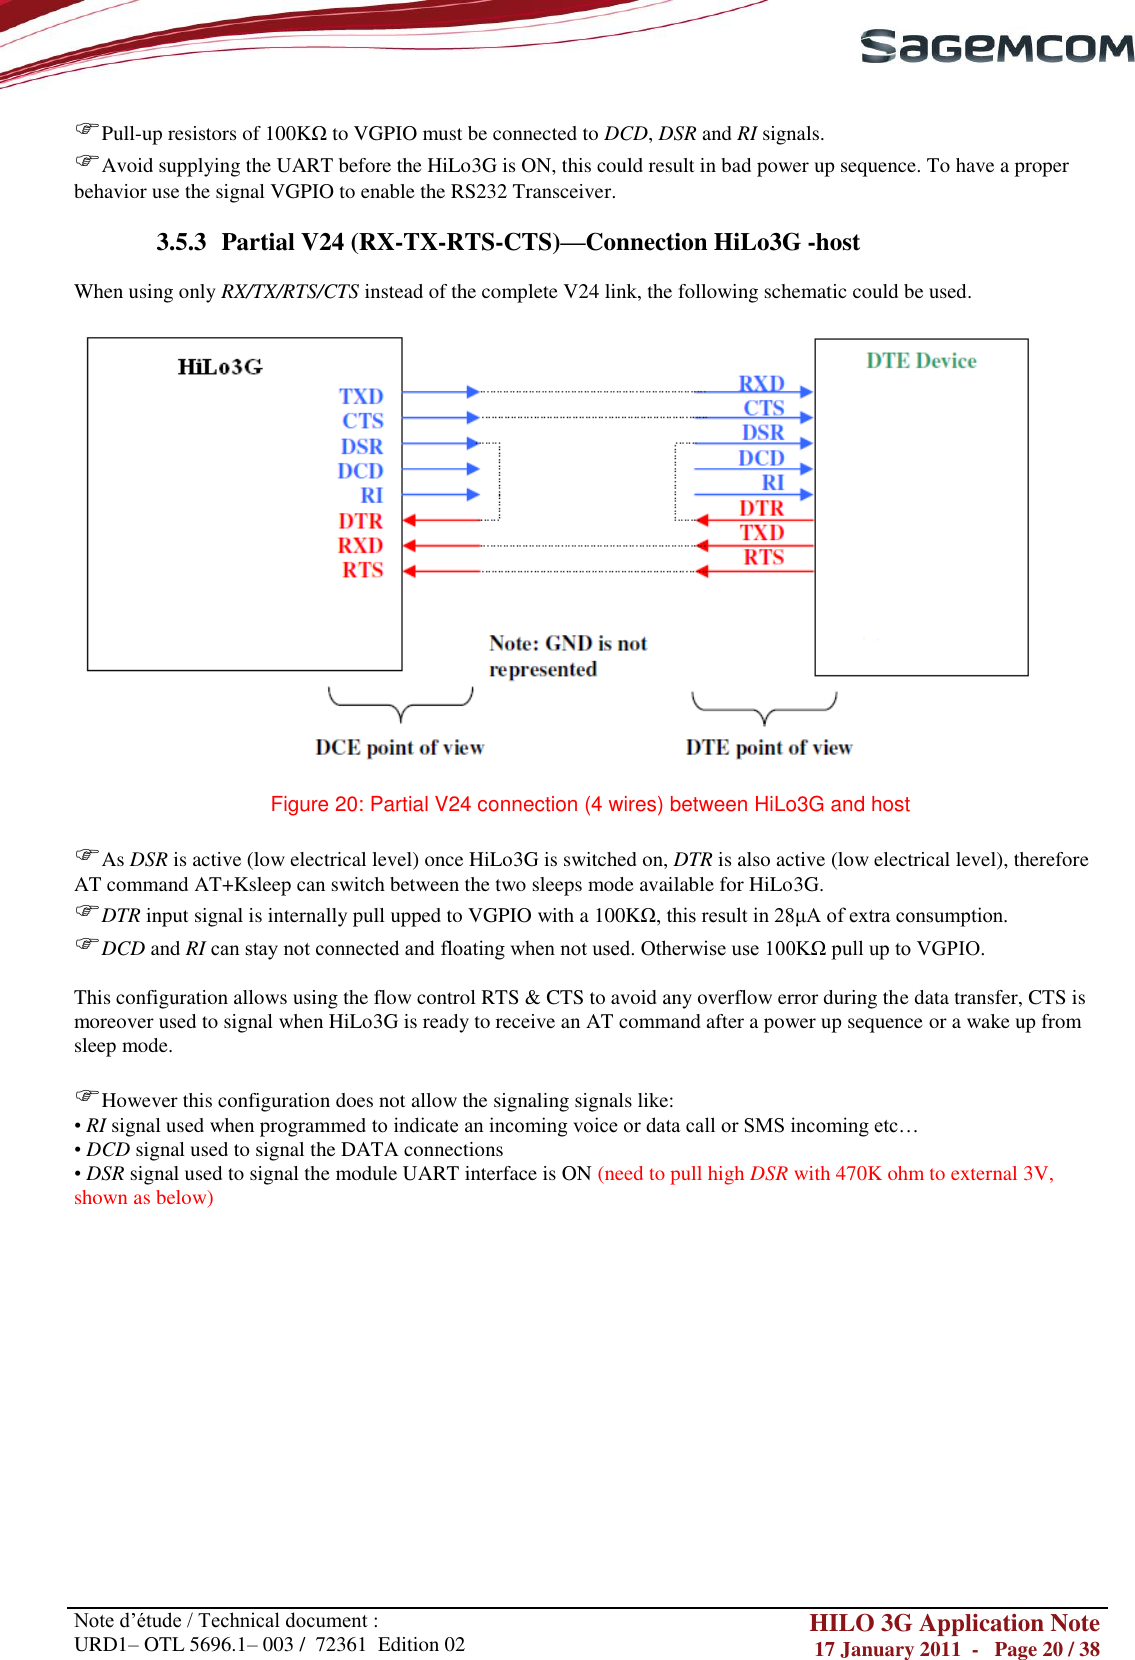       Note d‘étude / Technical document : URD1– OTL 5696.1– 003 /  72361  Edition 02 HILO 3G Application Note 17 January 2011  -   Page 20 / 38    Pull-up resistors of 100KΩ to VGPIO must be connected to DCD, DSR and RI signals. Avoid supplying the UART before the HiLo3G is ON, this could result in bad power up sequence. To have a proper behavior use the signal VGPIO to enable the RS232 Transceiver.  3.5.3 Partial V24 (RX-TX-RTS-CTS)—Connection HiLo3G -host  When using only RX/TX/RTS/CTS instead of the complete V24 link, the following schematic could be used.    Figure 20: Partial V24 connection (4 wires) between HiLo3G and host  As DSR is active (low electrical level) once HiLo3G is switched on, DTR is also active (low electrical level), therefore AT command AT+Ksleep can switch between the two sleeps mode available for HiLo3G. DTR input signal is internally pull upped to VGPIO with a 100KΩ, this result in 28μA of extra consumption. DCD and RI can stay not connected and floating when not used. Otherwise use 100KΩ pull up to VGPIO. This configuration allows using the flow control RTS &amp; CTS to avoid any overflow error during the data transfer, CTS is moreover used to signal when HiLo3G is ready to receive an AT command after a power up sequence or a wake up from sleep mode.  However this configuration does not allow the signaling signals like: • RI signal used when programmed to indicate an incoming voice or data call or SMS incoming etc… • DCD signal used to signal the DATA connections • DSR signal used to signal the module UART interface is ON (need to pull high DSR with 470K ohm to external 3V, shown as below) 